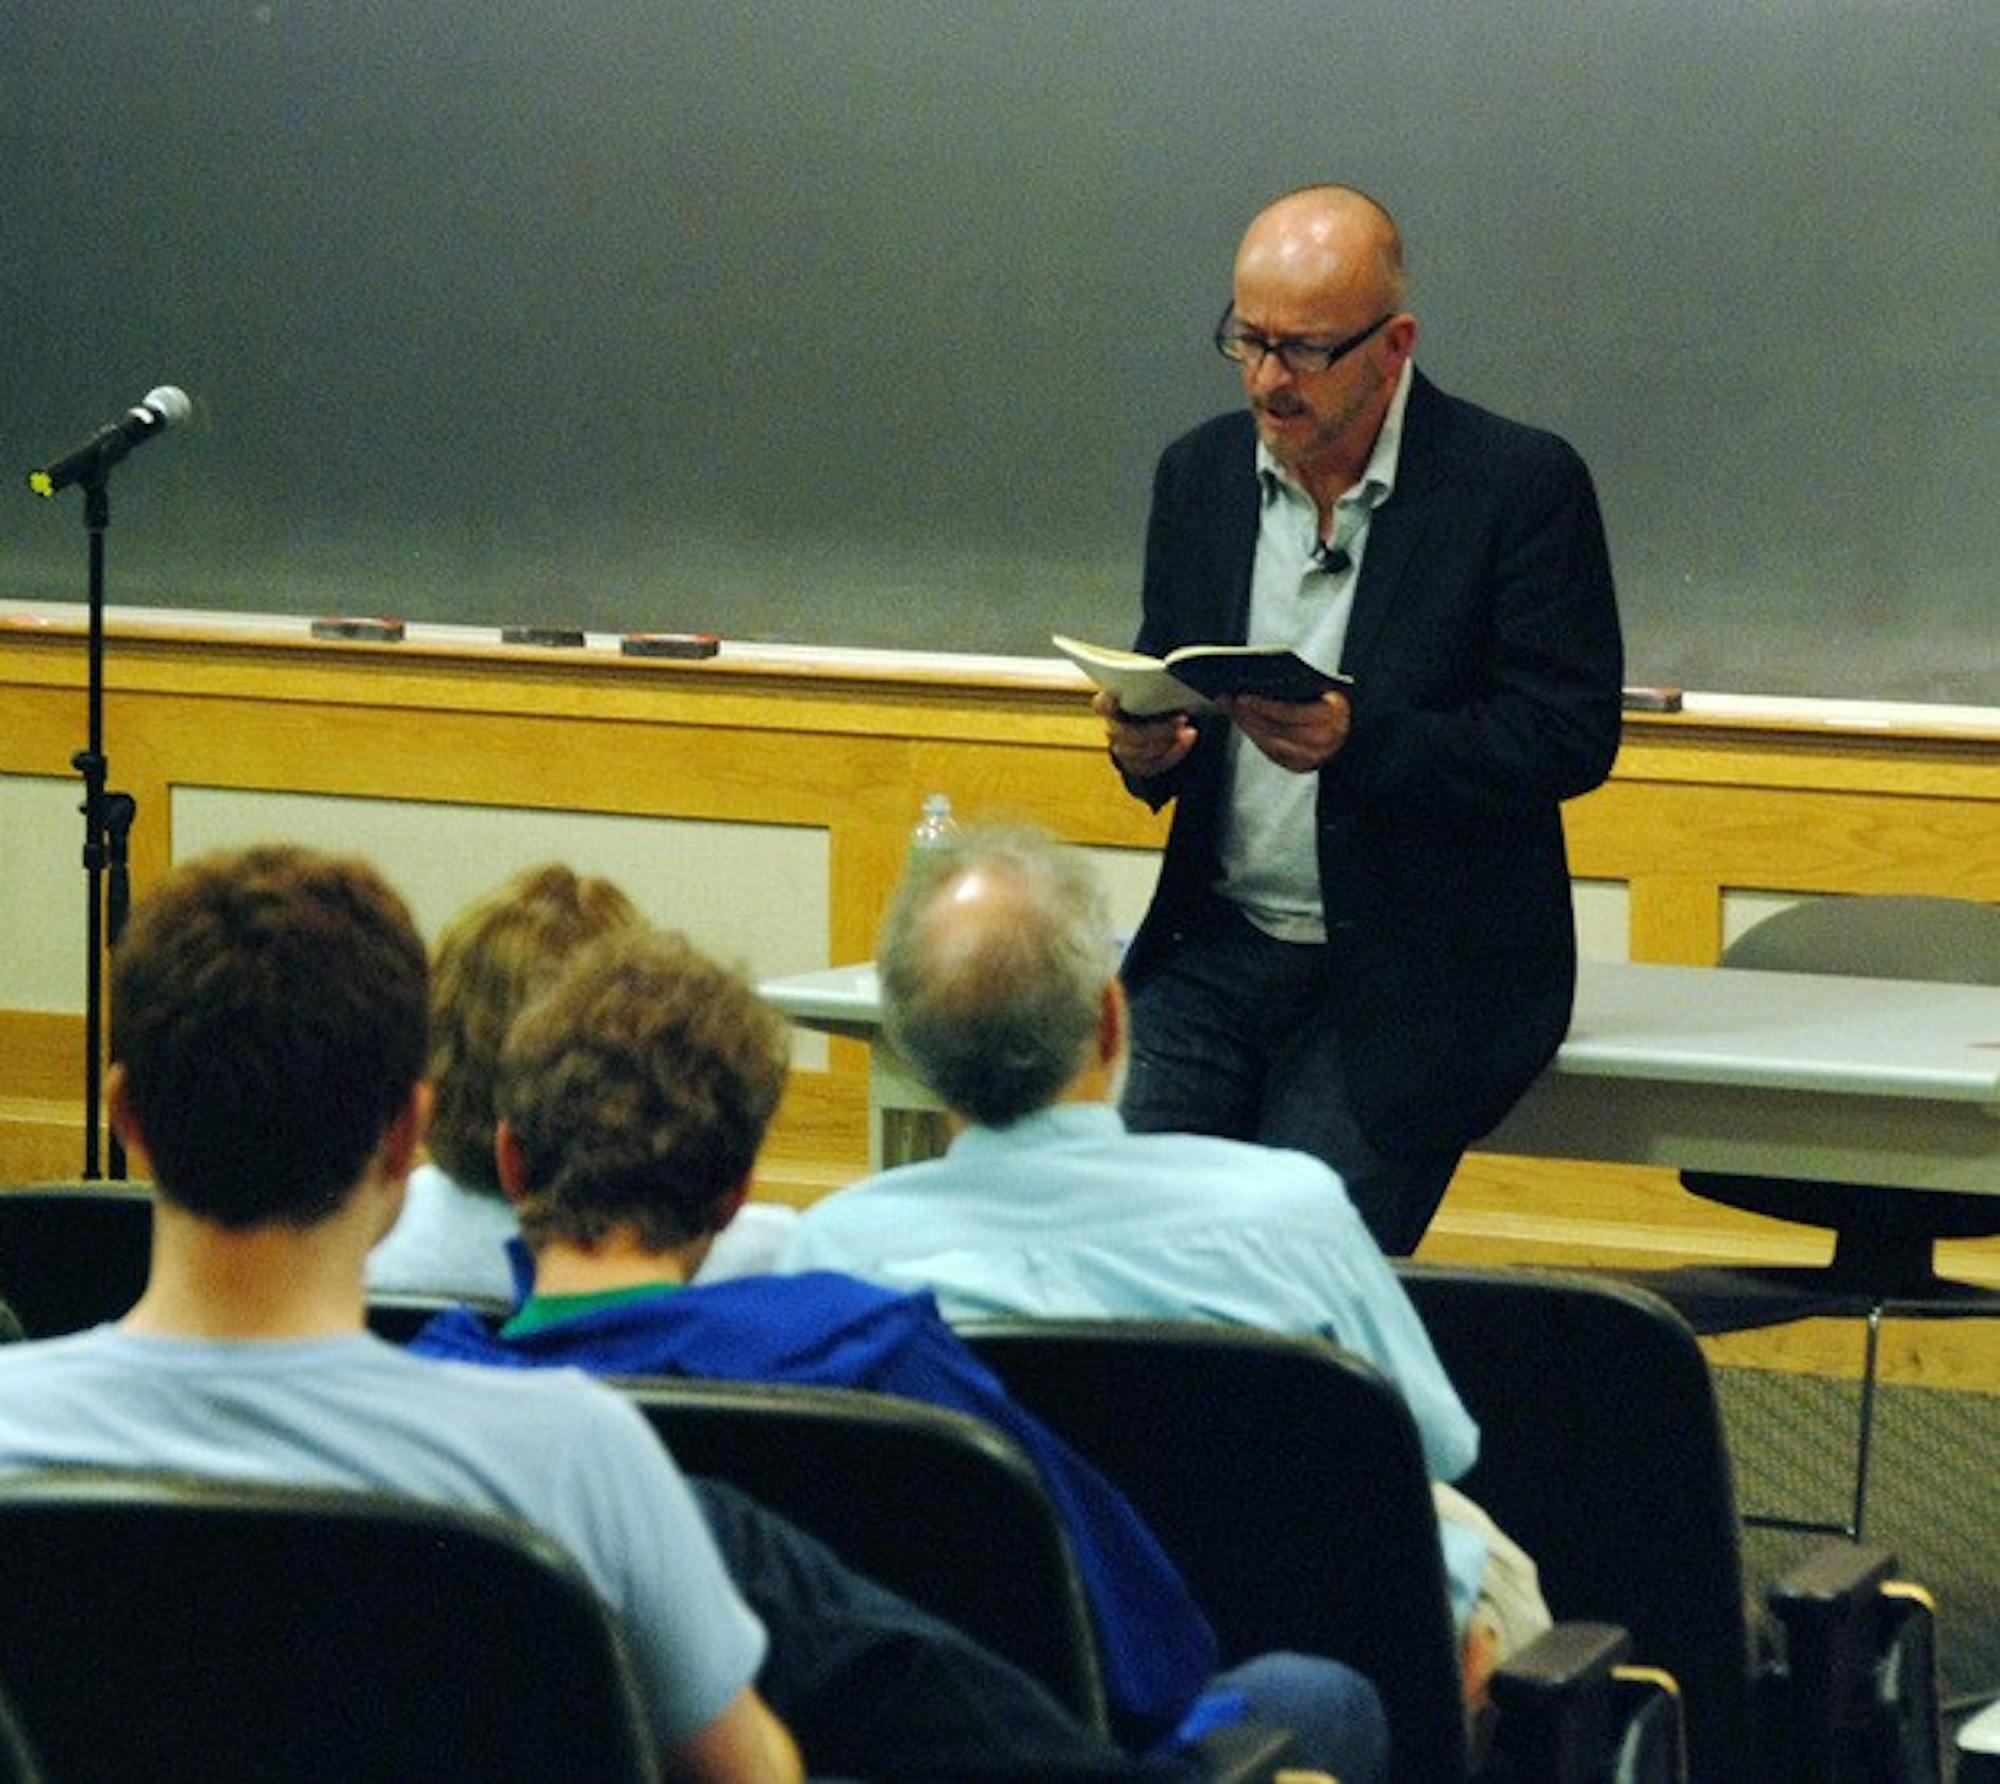 Poet and author Mark Doty spoke about his writing in Filene Audtiorium Thursday night. Doty lived in Provincetown, Mass. during the AIDS epidemic in the early '90s and lost his partner to the disease.